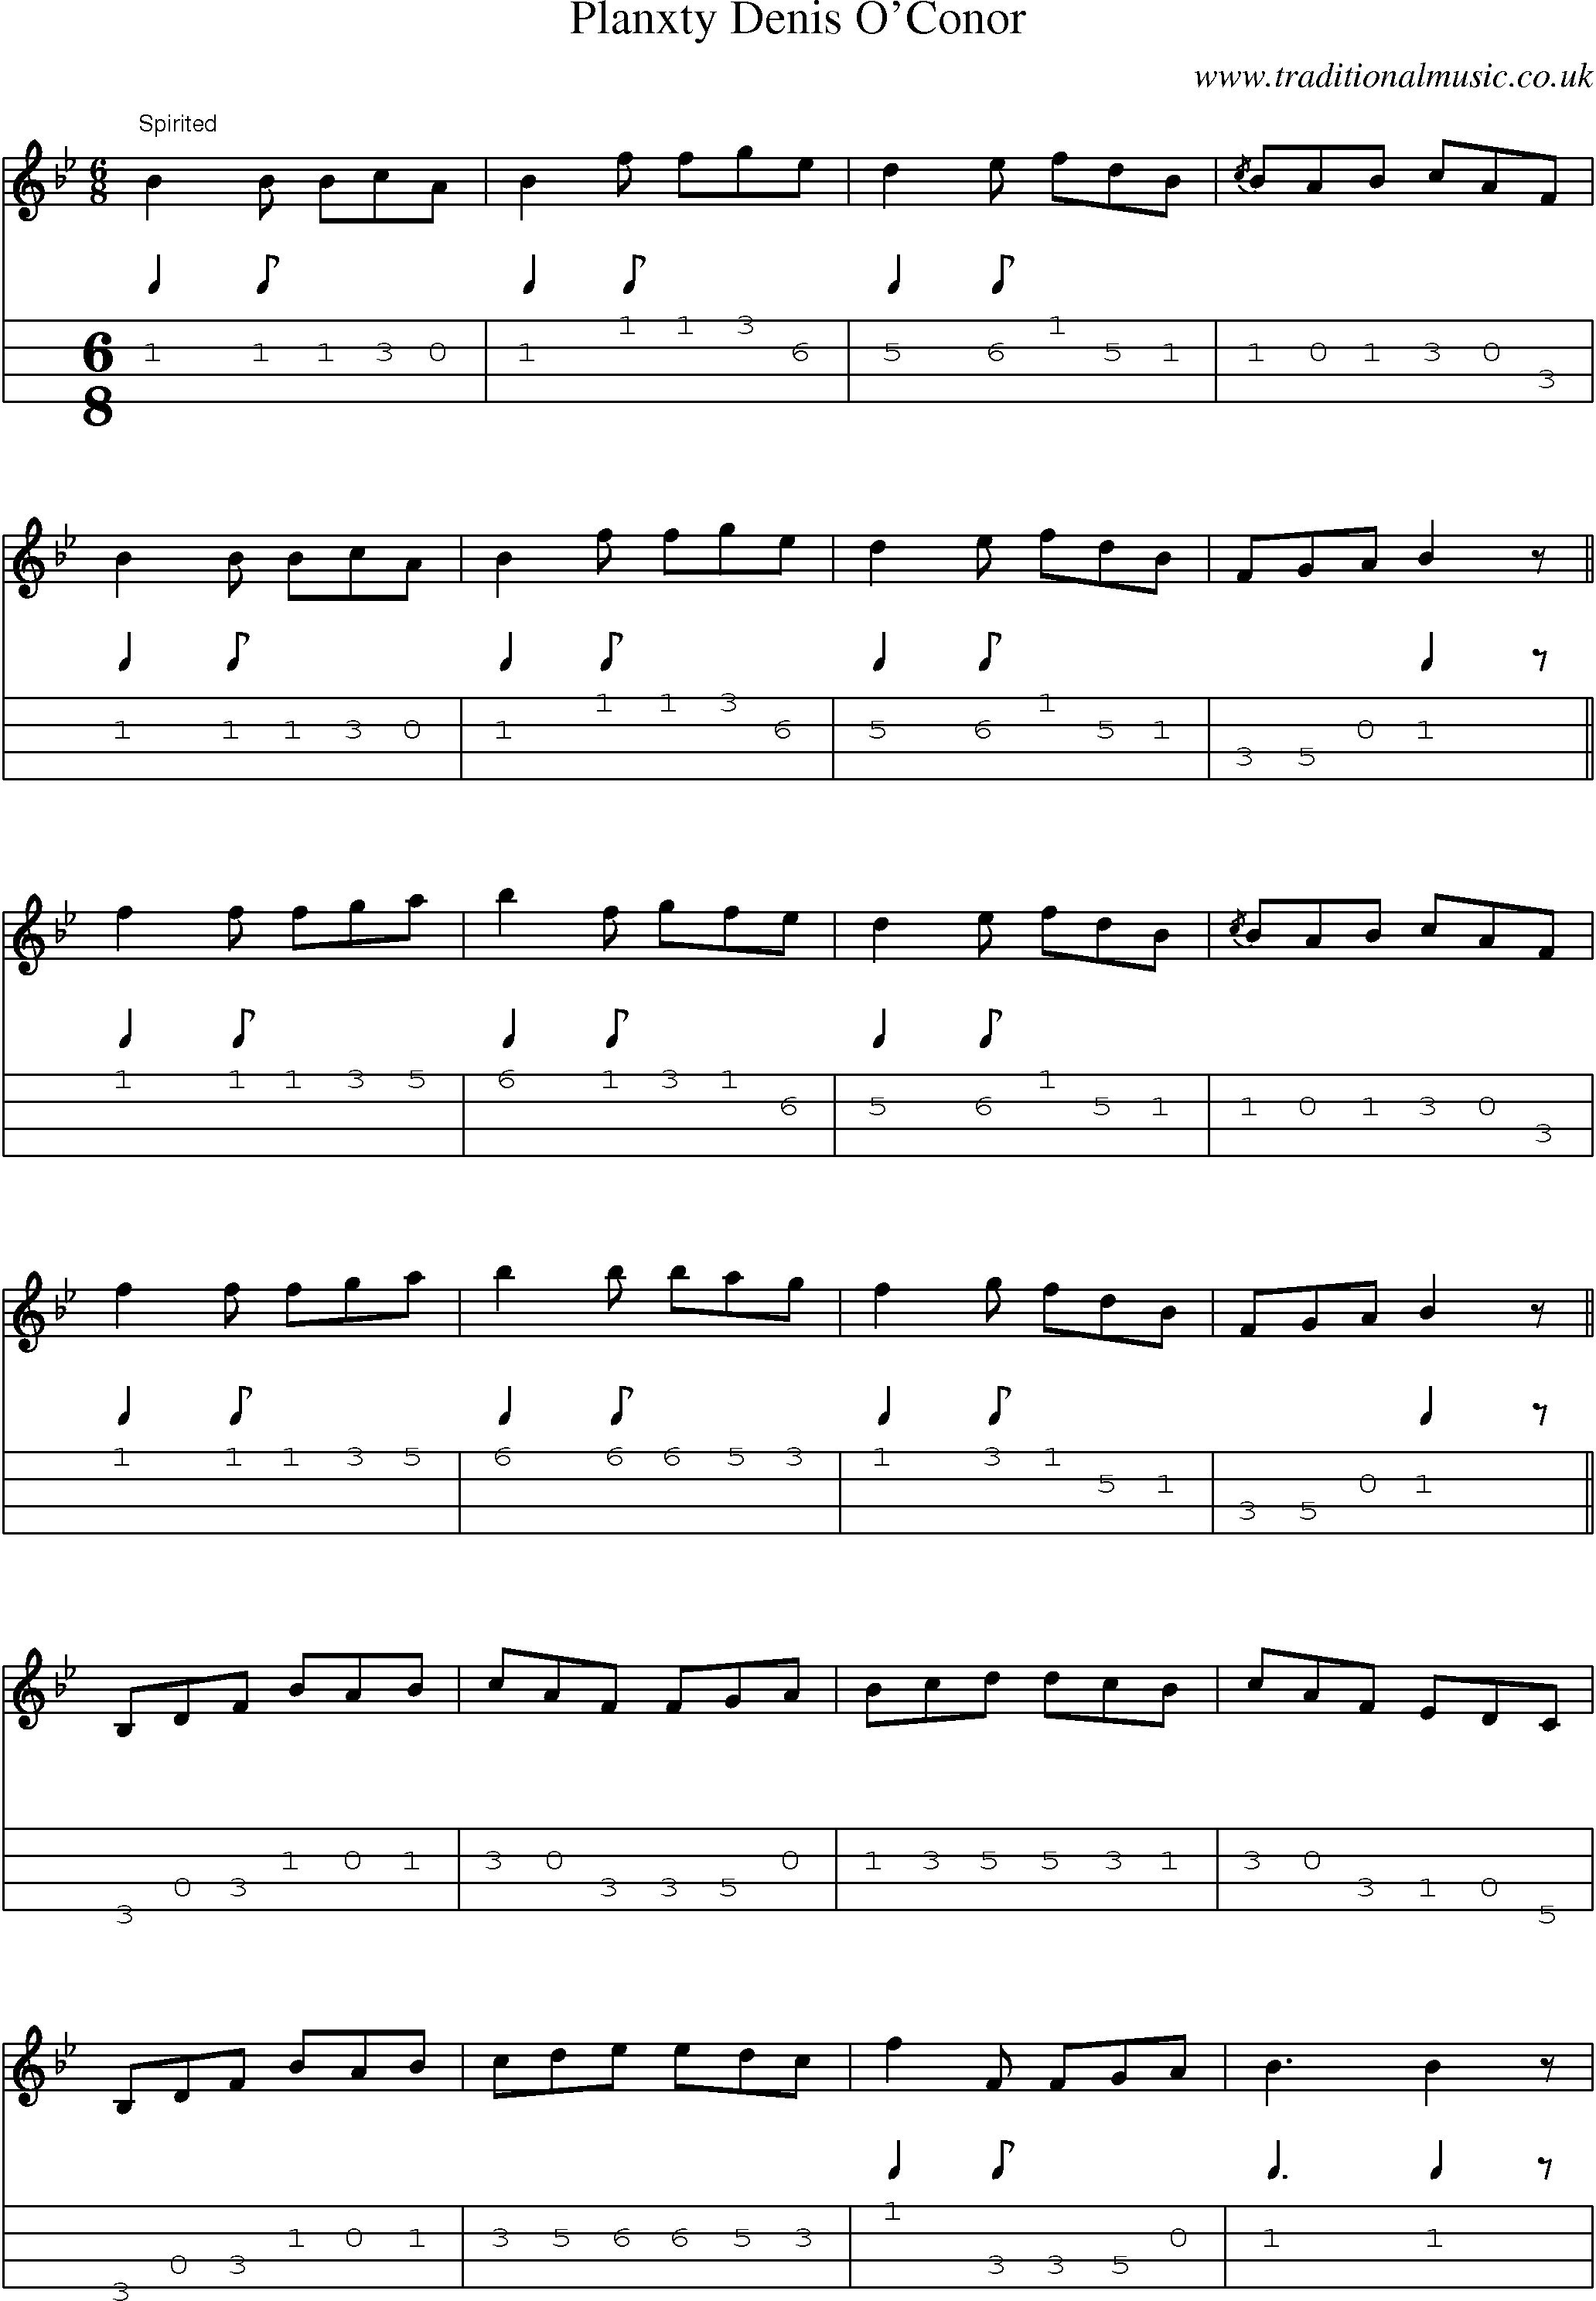 Music Score and Mandolin Tabs for Planxty Denis Oconor